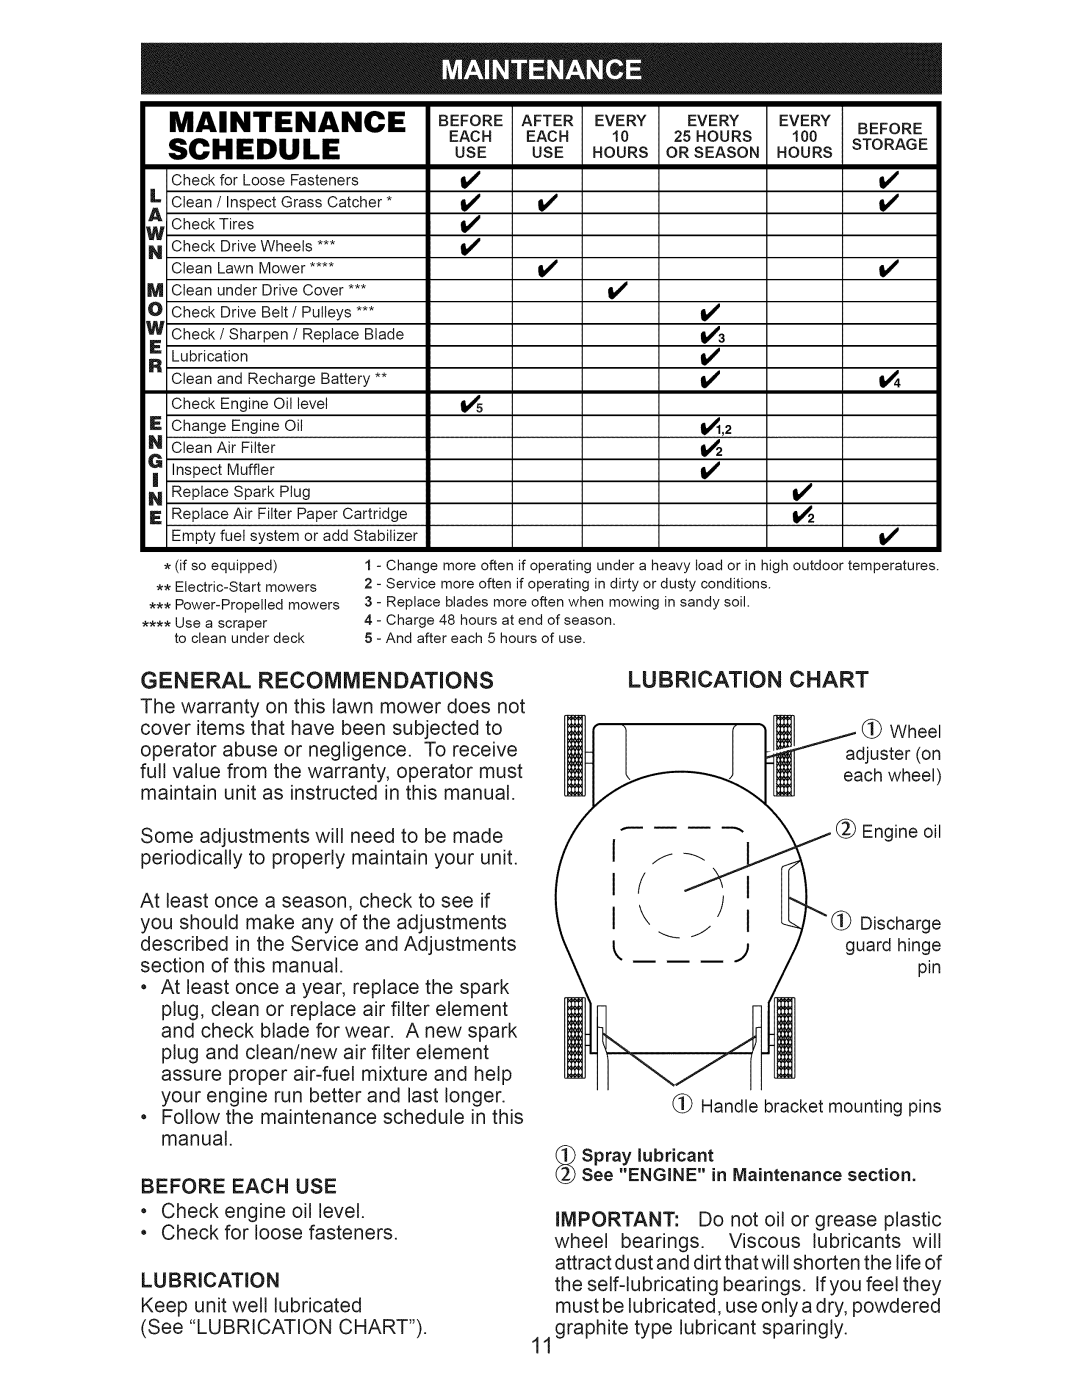 Craftsman 917.375012 owner manual Maintenance, Schedule, Use Hours 